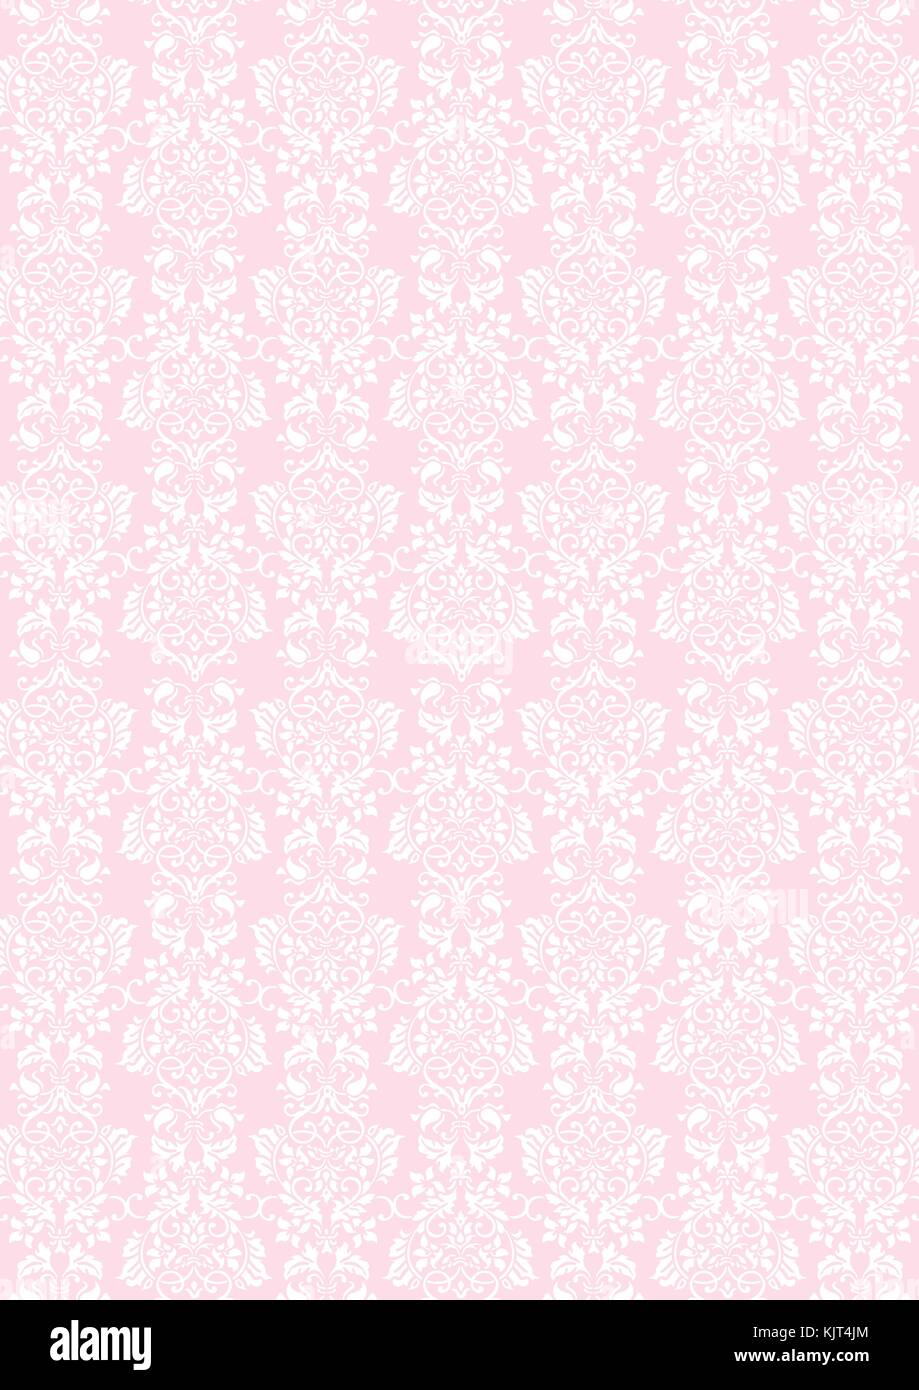 A3 size Elegant white flowers pattern textured pink wallpaper background Stock Vector